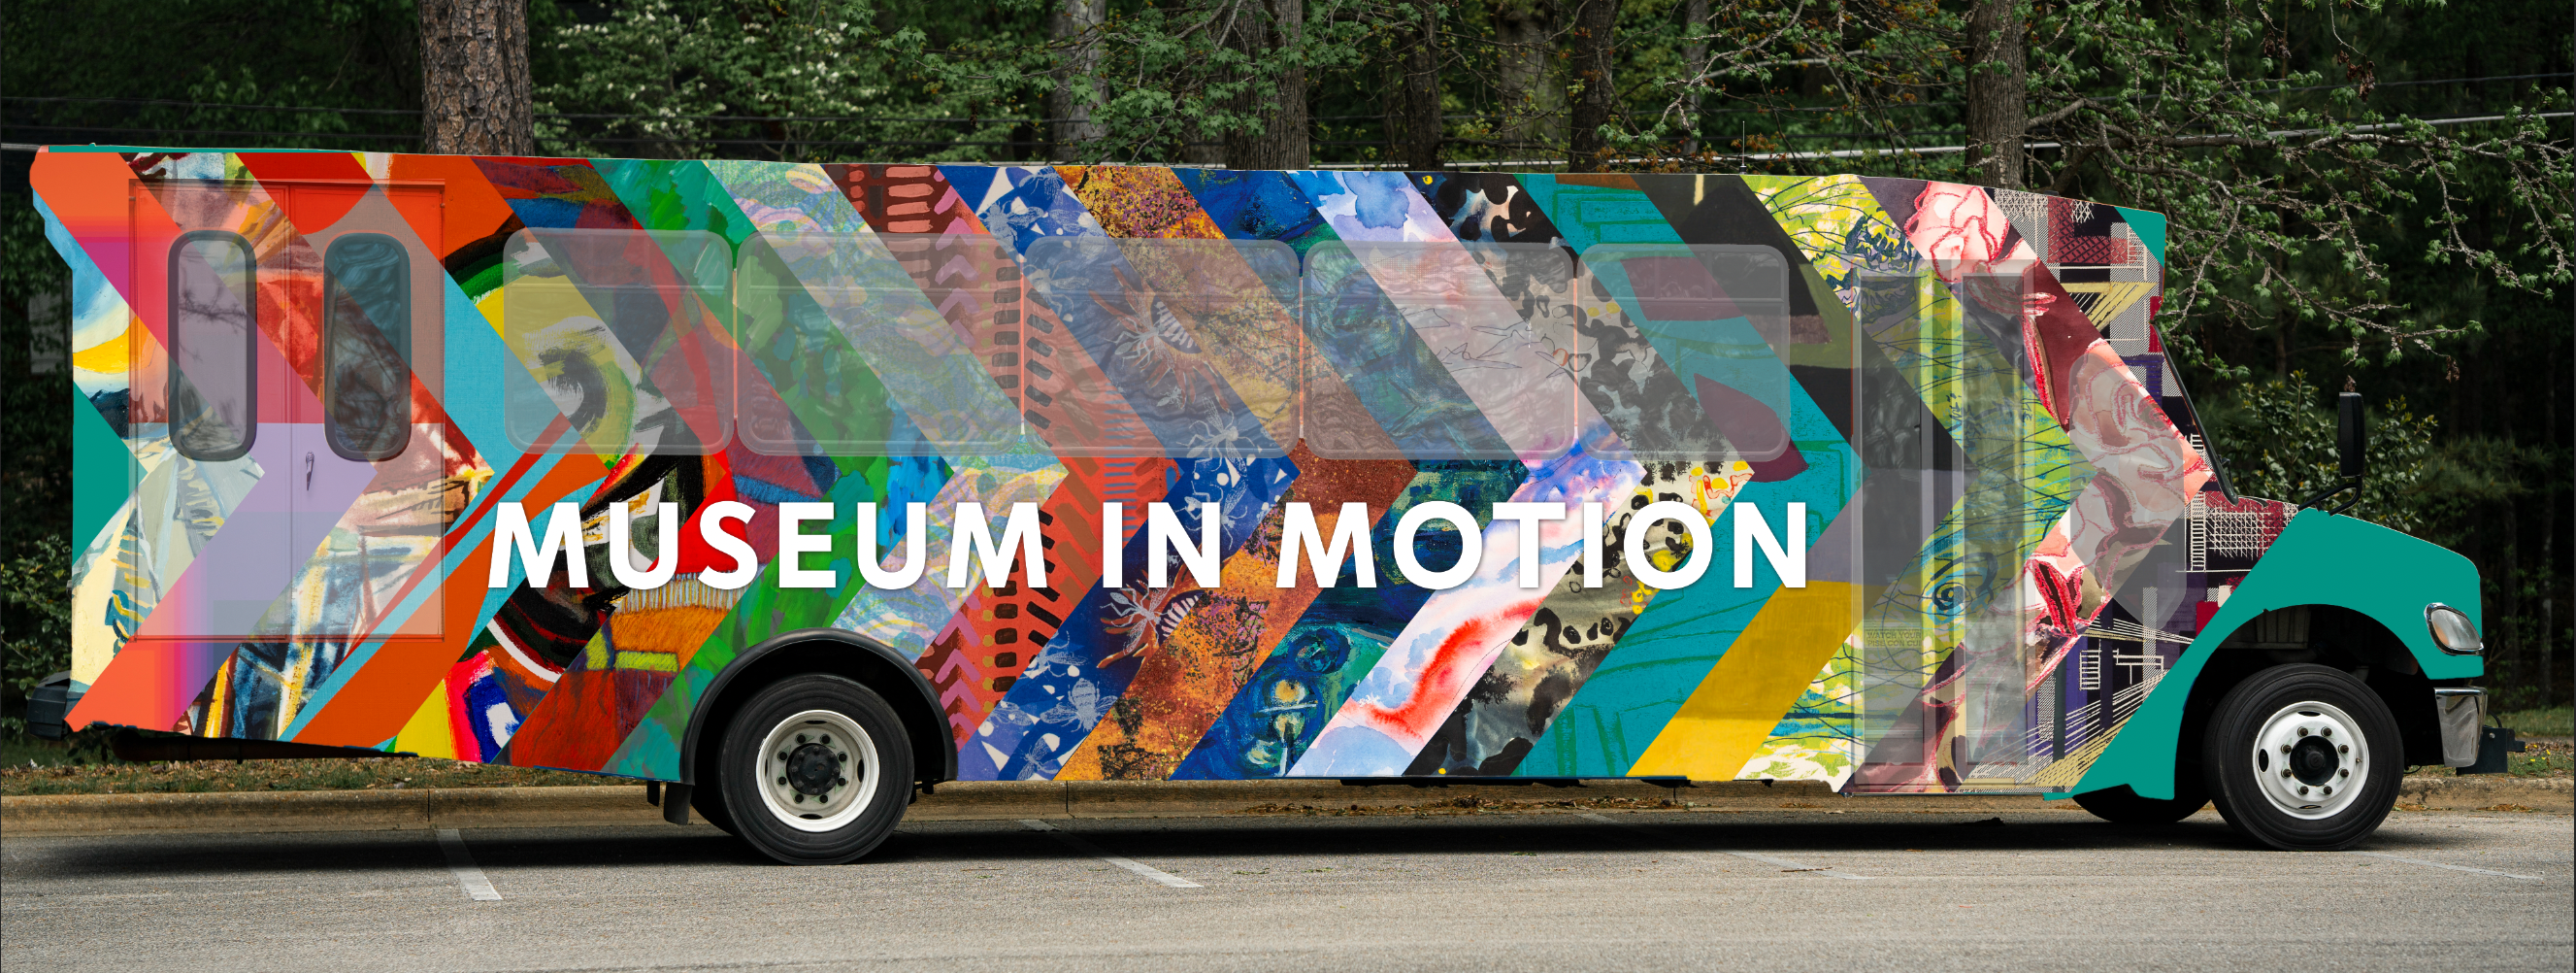 Artist rendering of a bus exterior for an art museum on wheels.